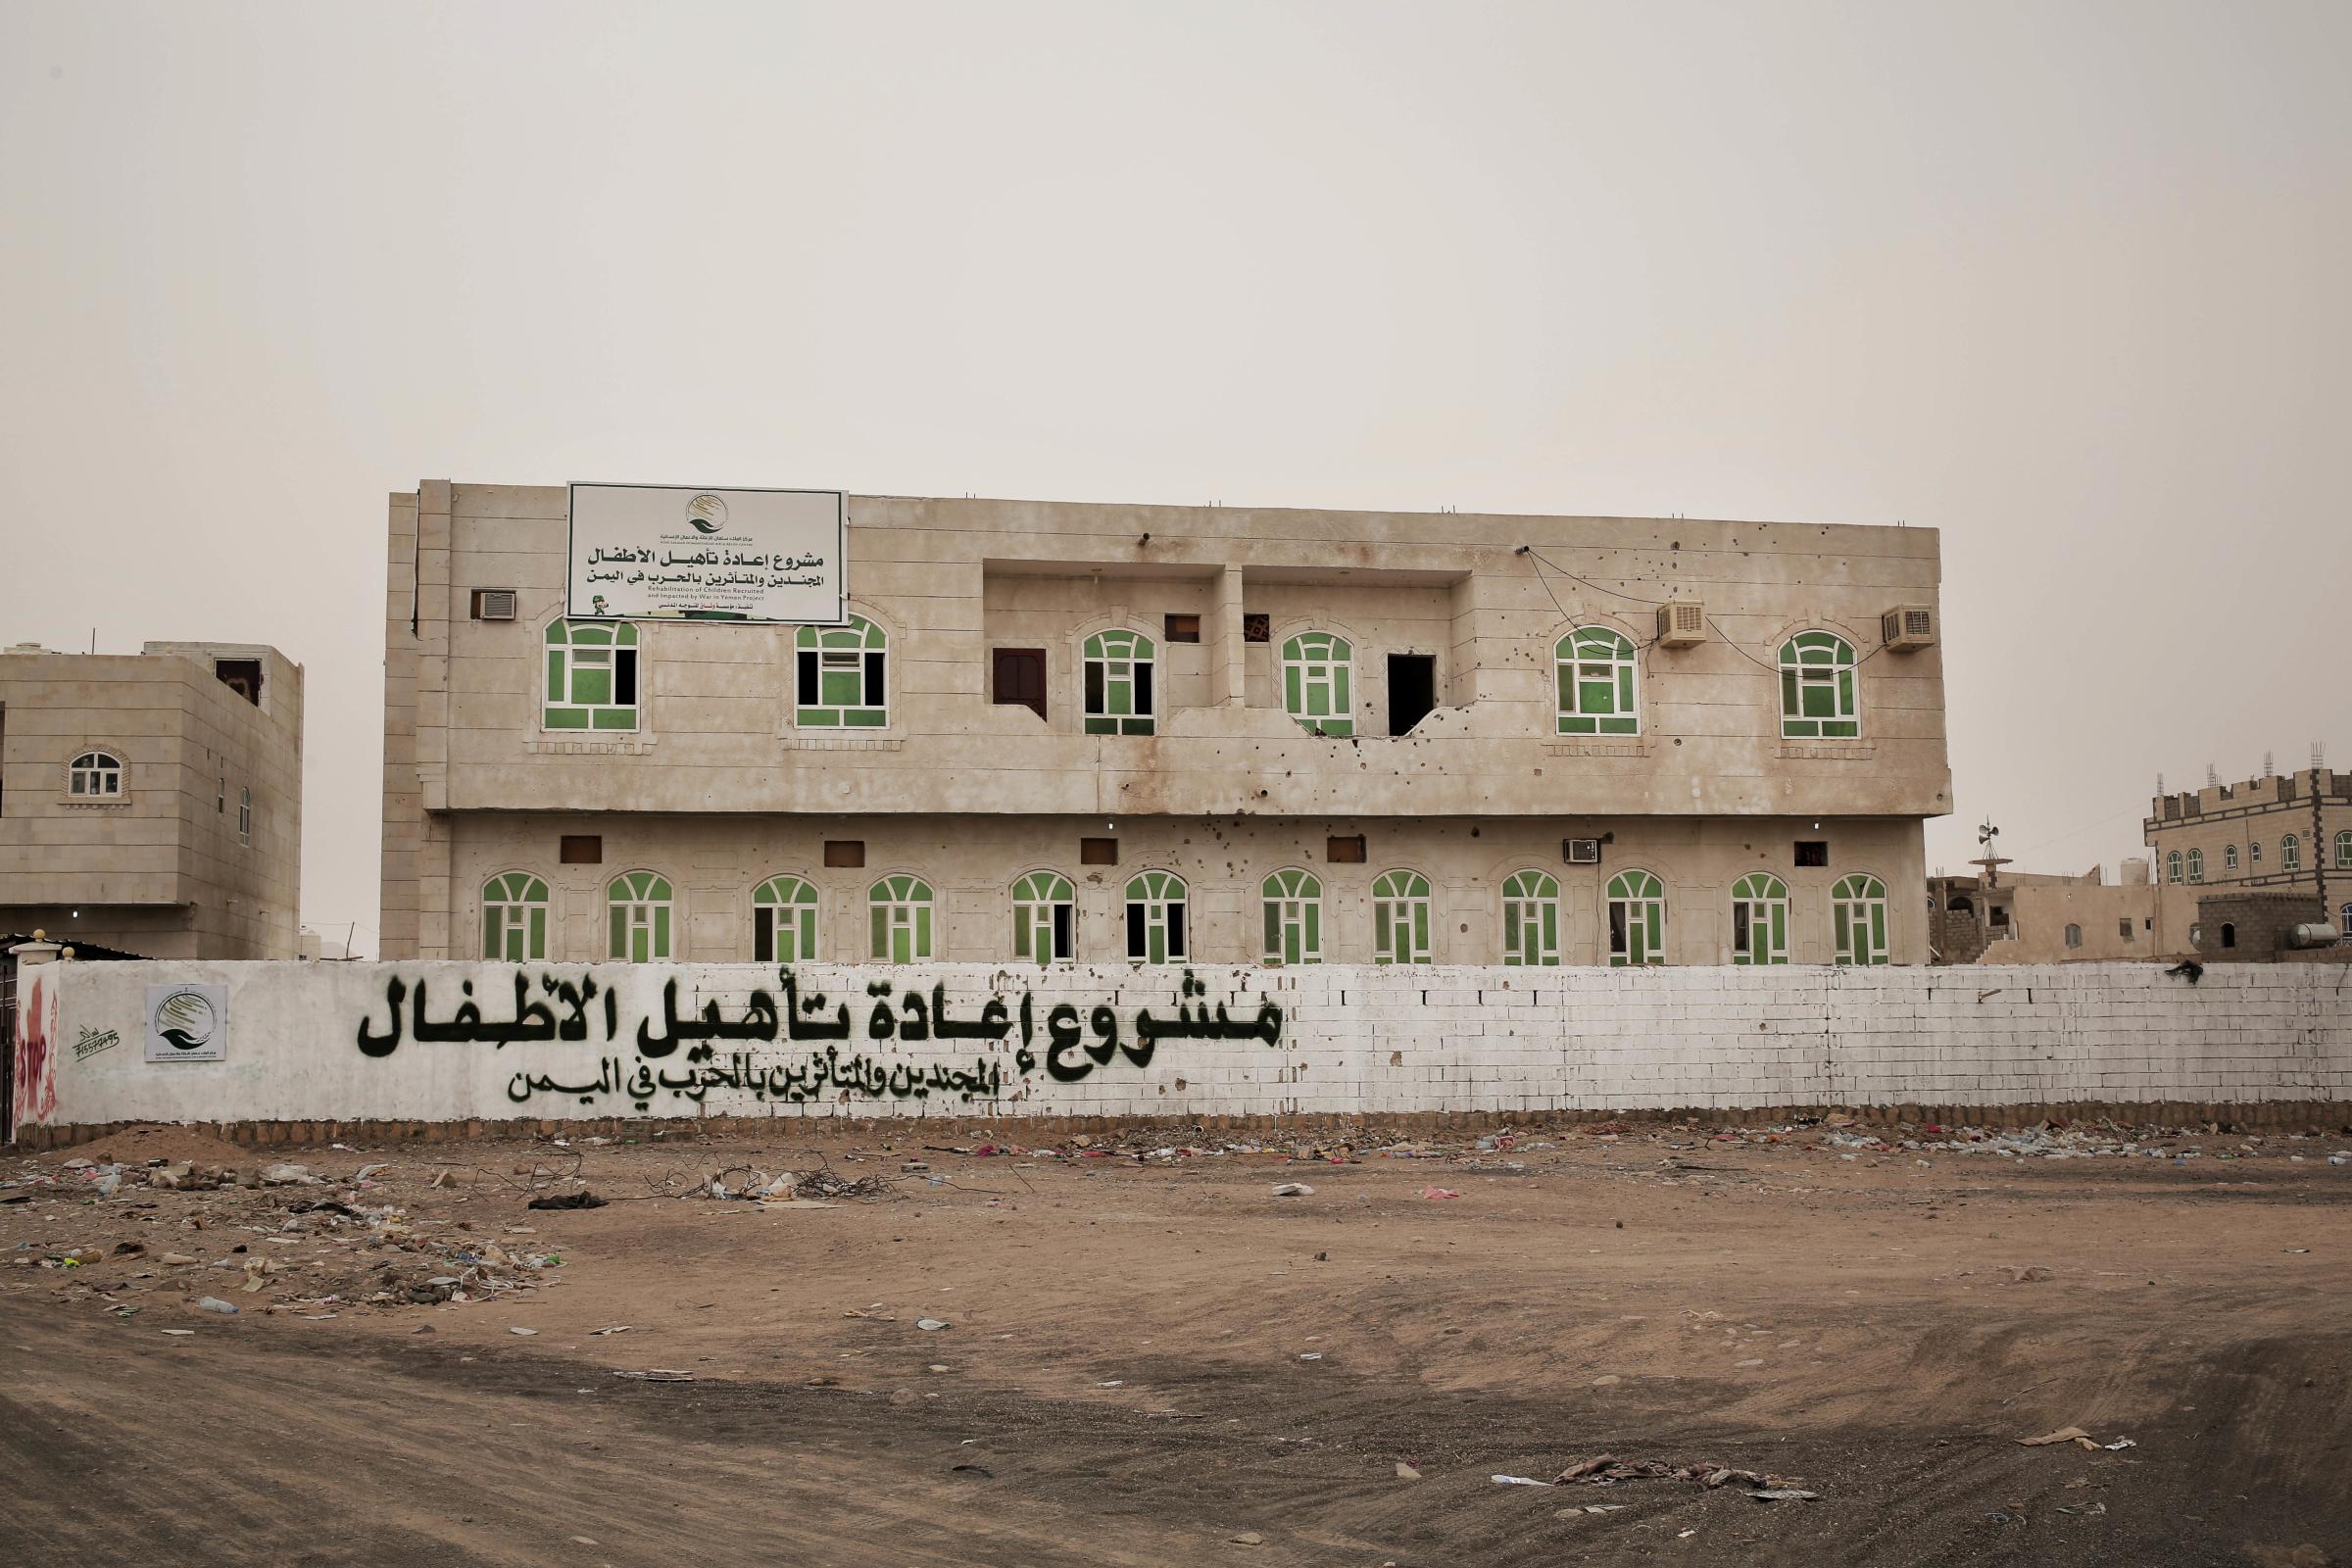 Rehabilitation center for former child soldiers in Marib.